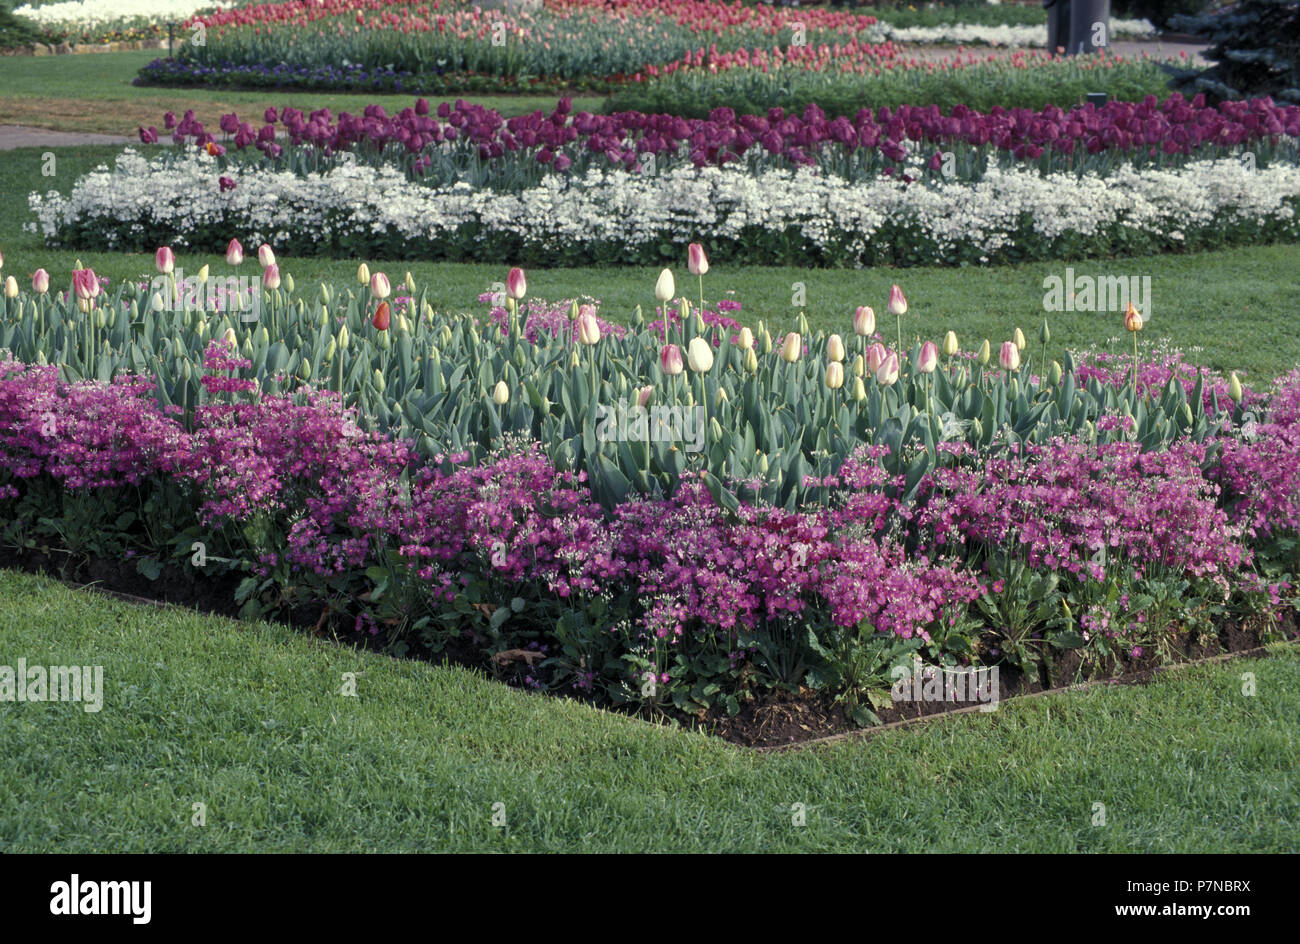 Garden beds of Tulips (Tulipa) and pink and white Primula flowers, New South Wales, Australia Stock Photo